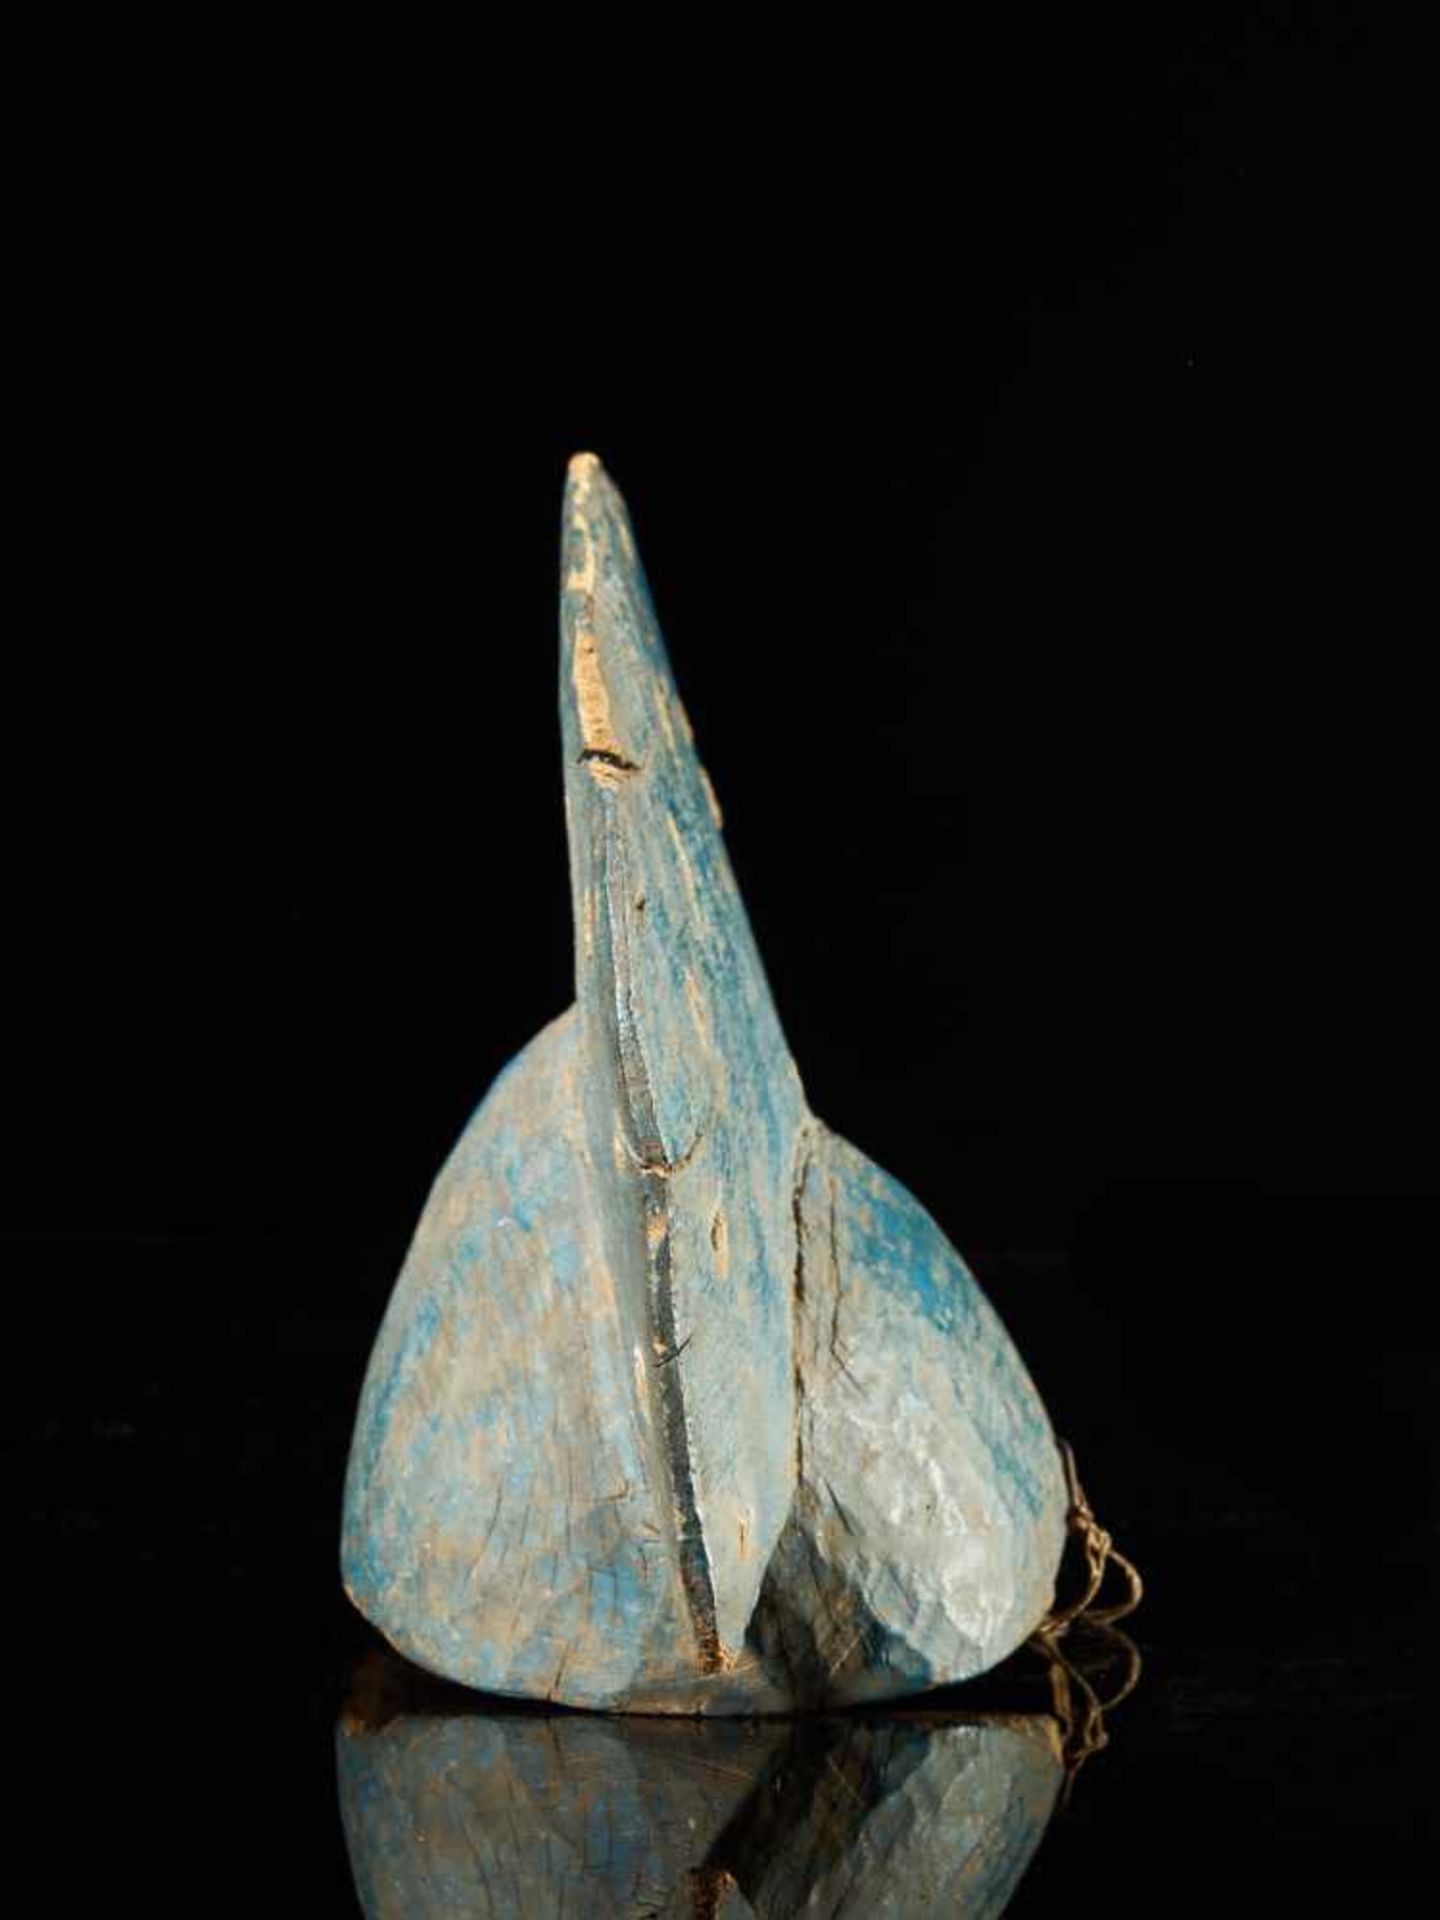 Blue Painted Wooden Hat - Senofo People, Ivory Coast - Tribal ArtBlue Painted Wooden Hat - Senofo - Image 3 of 3